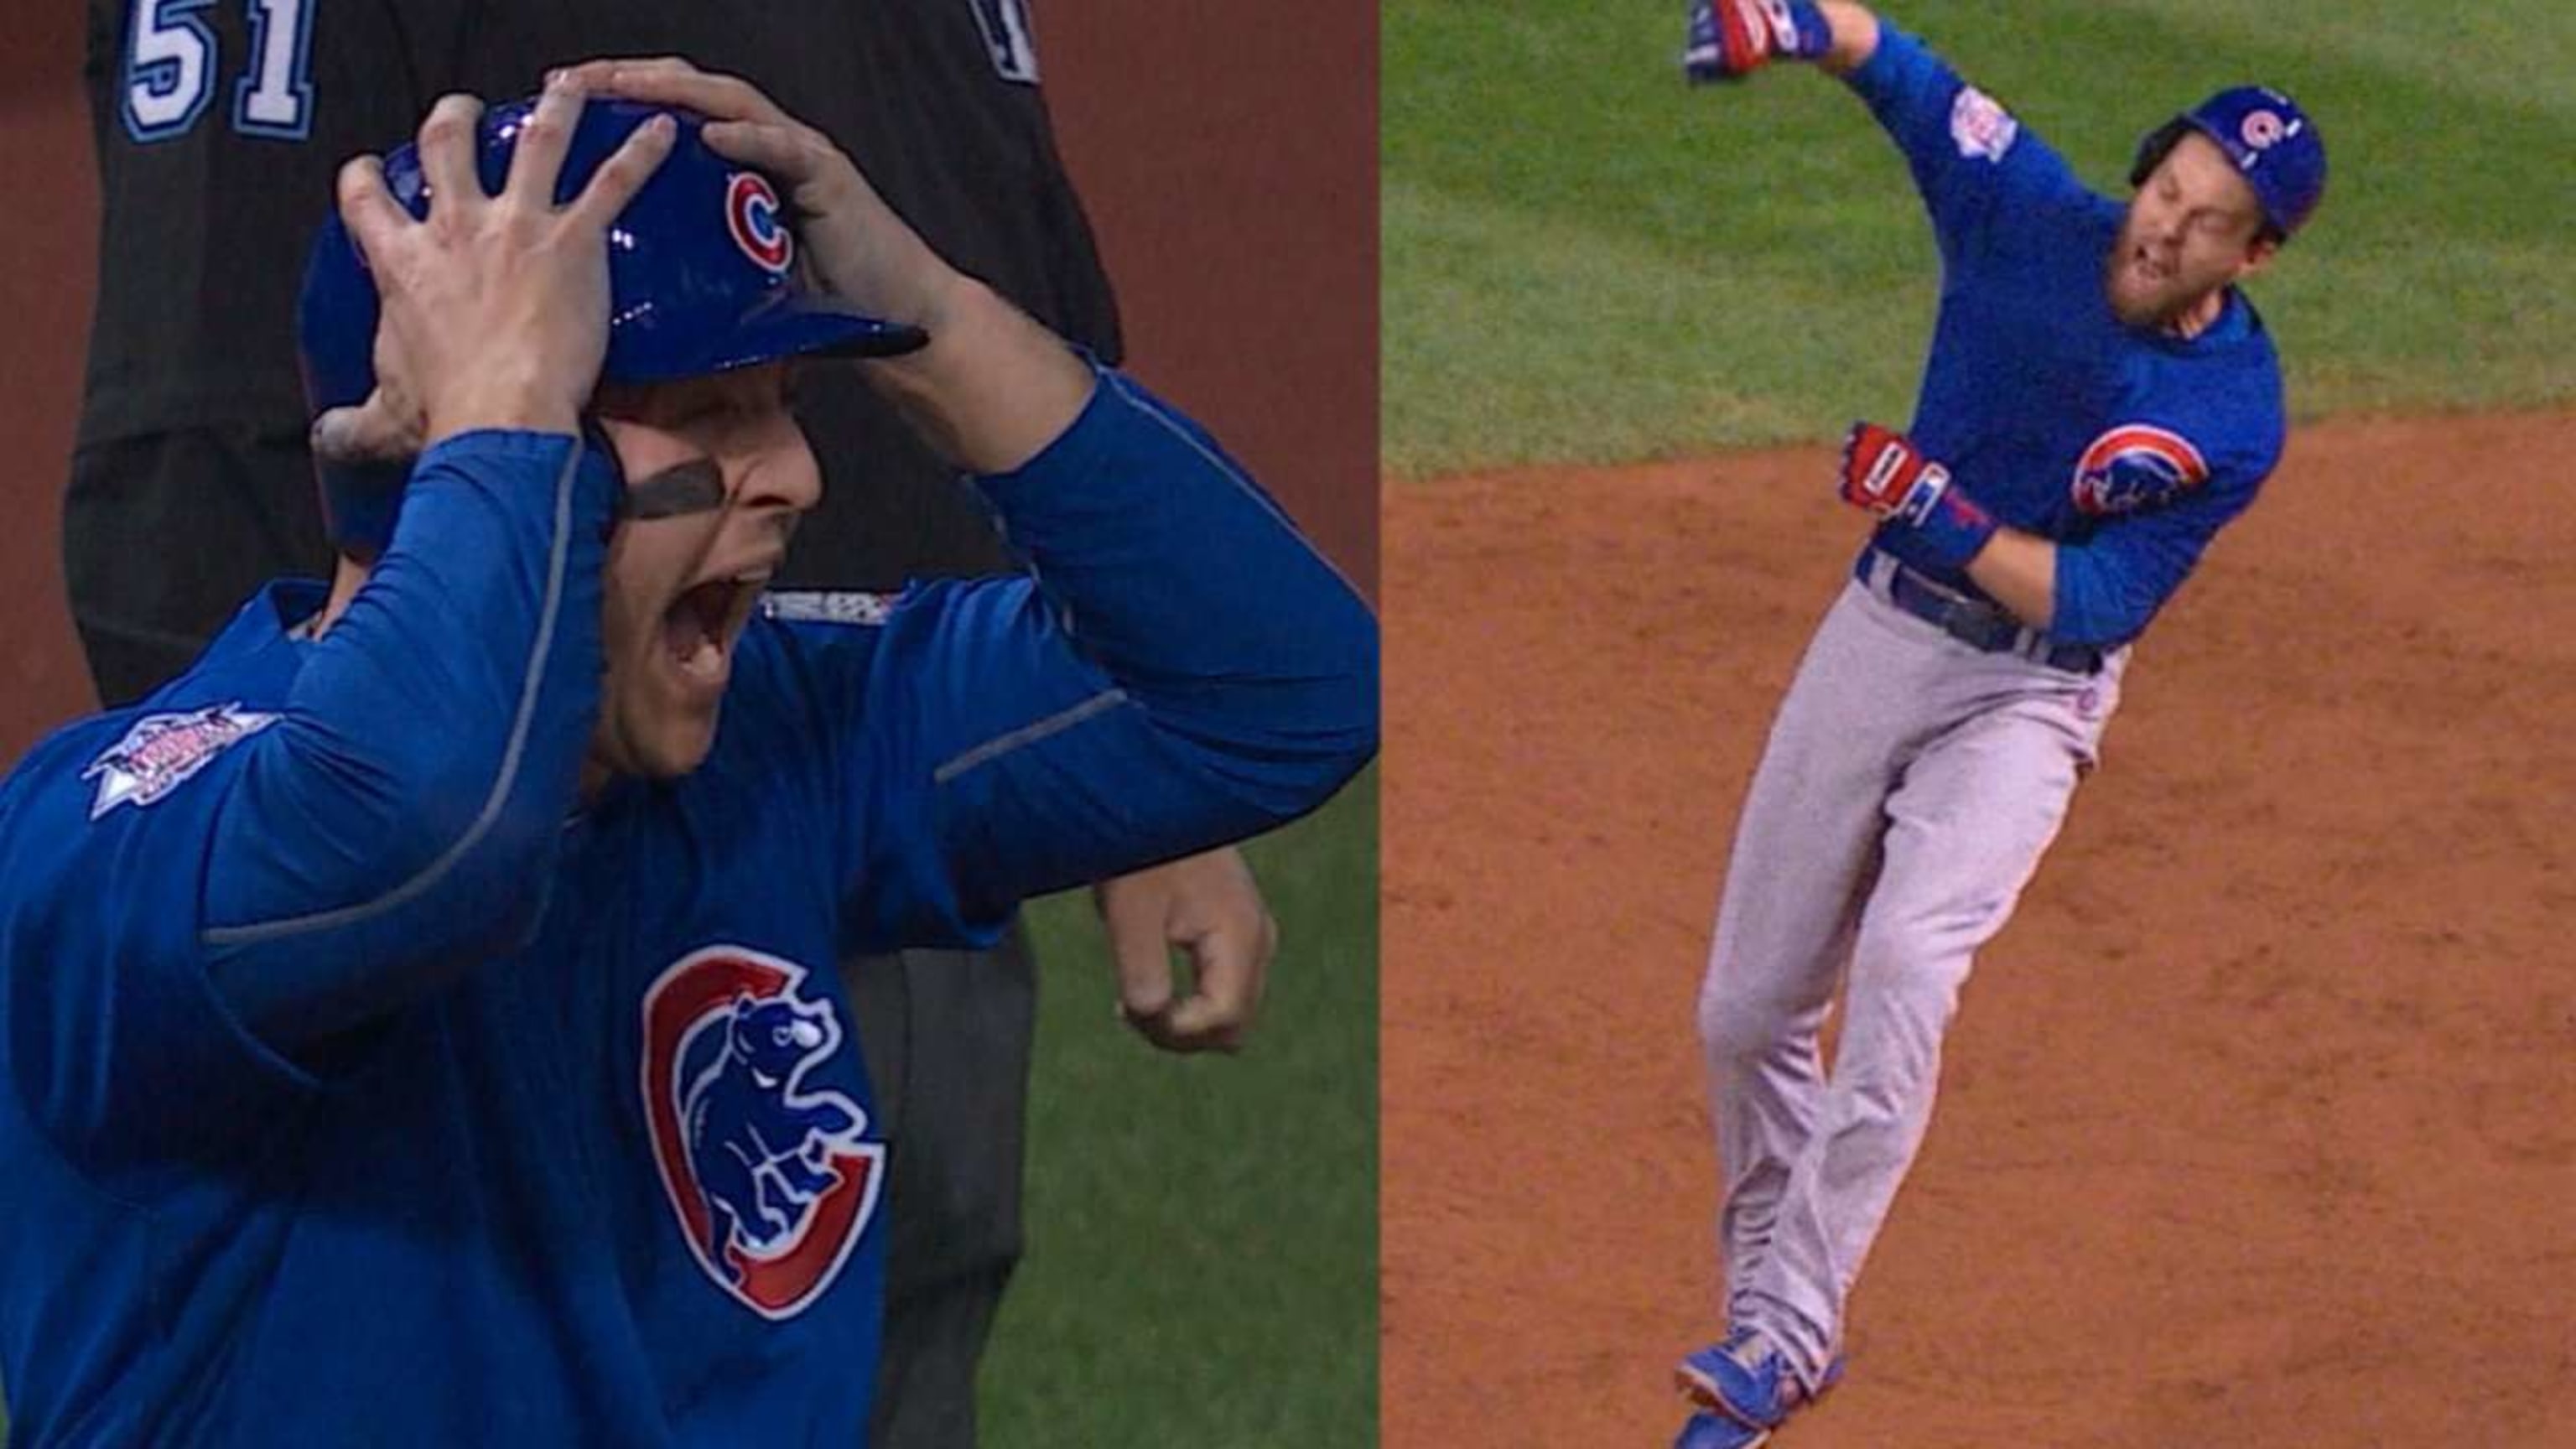 Cubs World Series MVP Zobrist entertains fans at Miracle game, Sports